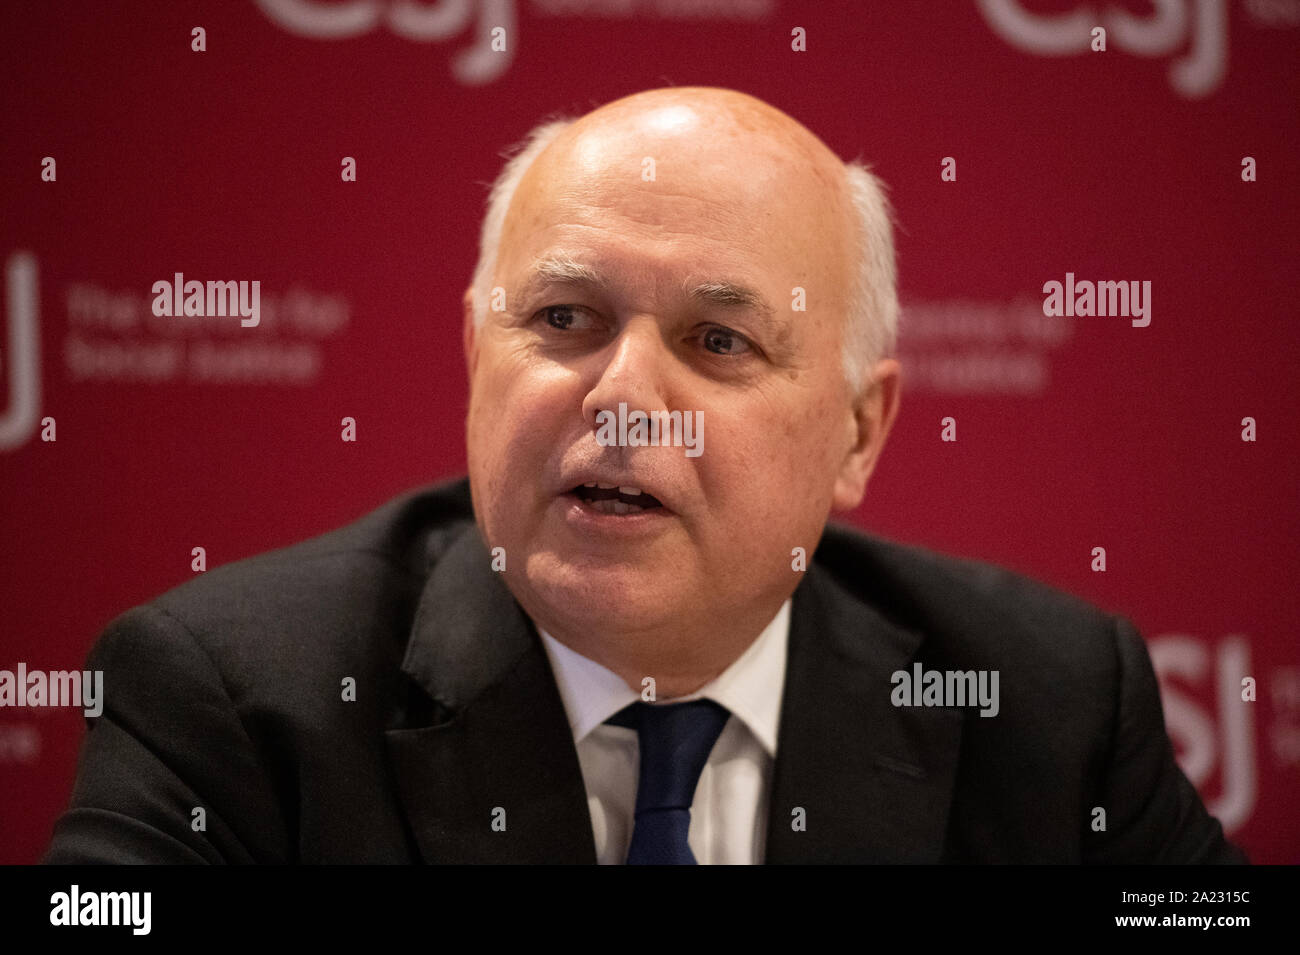 Manchester, UK. 30th Sep, 2019. Iain Duncan Smith, MP for Chingford and Woodford Green, speaks at the Centre for Social Justice fringe event The Forgotten Few: Why are 1.3 million people still unemployed?, on day two of the Conservative Party Conference in Manchester. Credit: Russell Hart/Alamy Live News Stock Photo